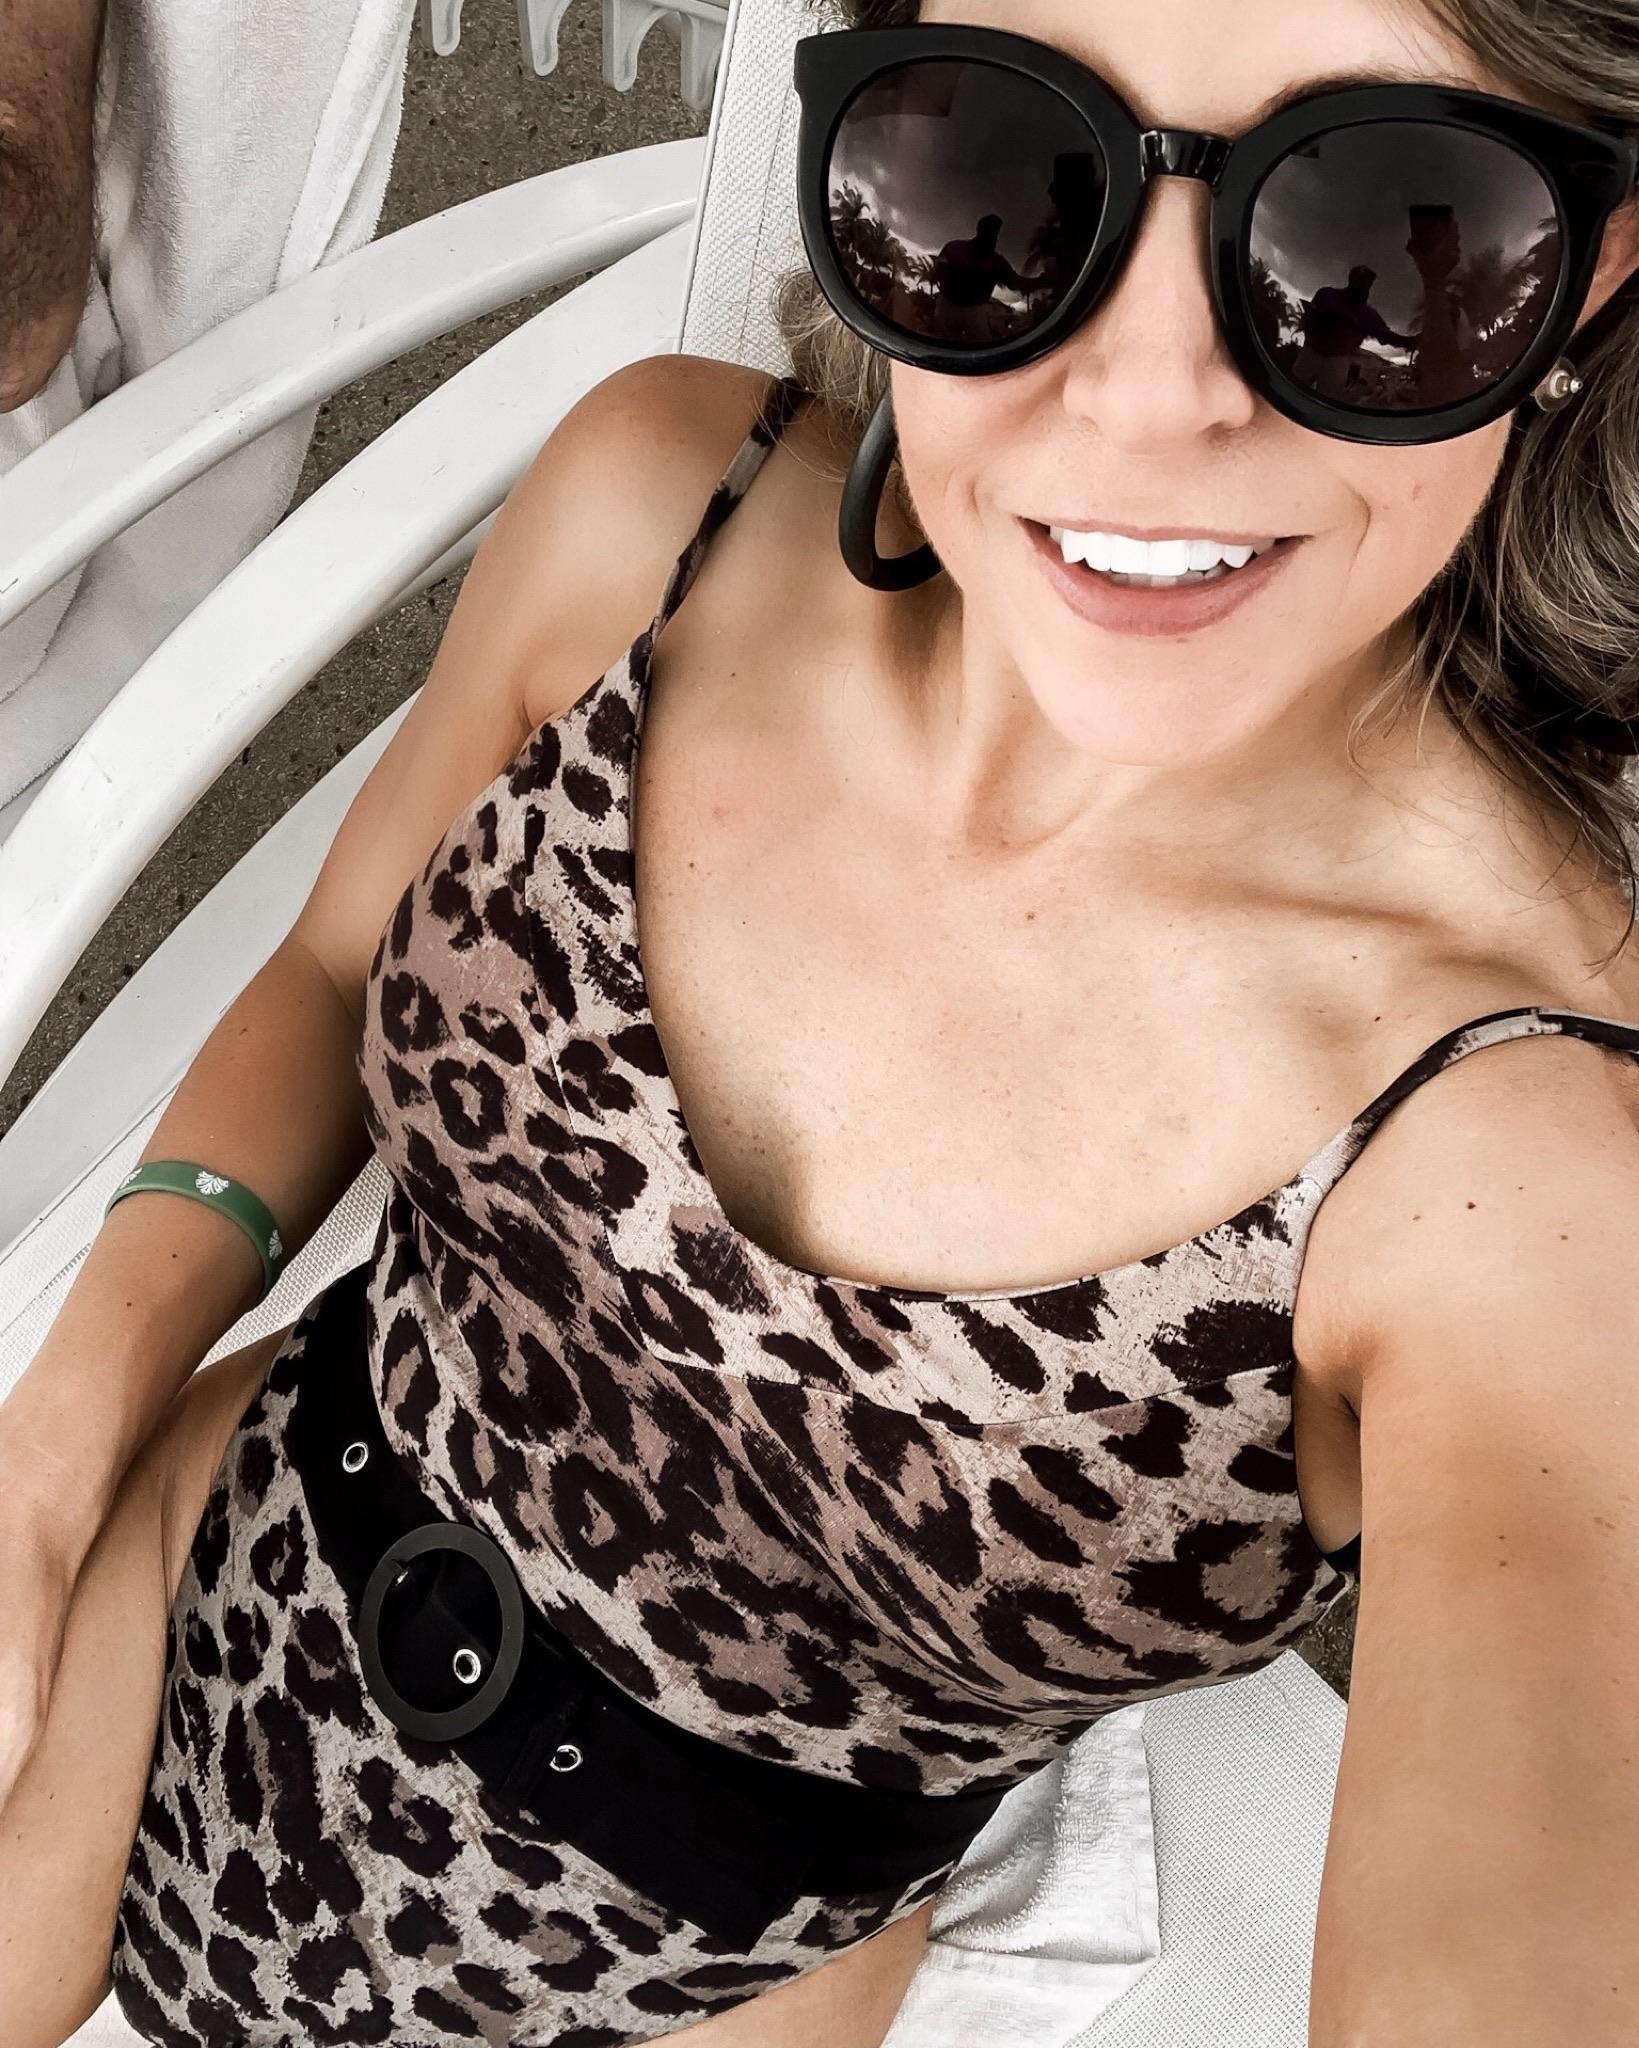 Style Blogger Life Lutzurious details her top Instagram posts and best sellers from the LiketoKnow.It app in her monthly hot list, including this leopard one piece.